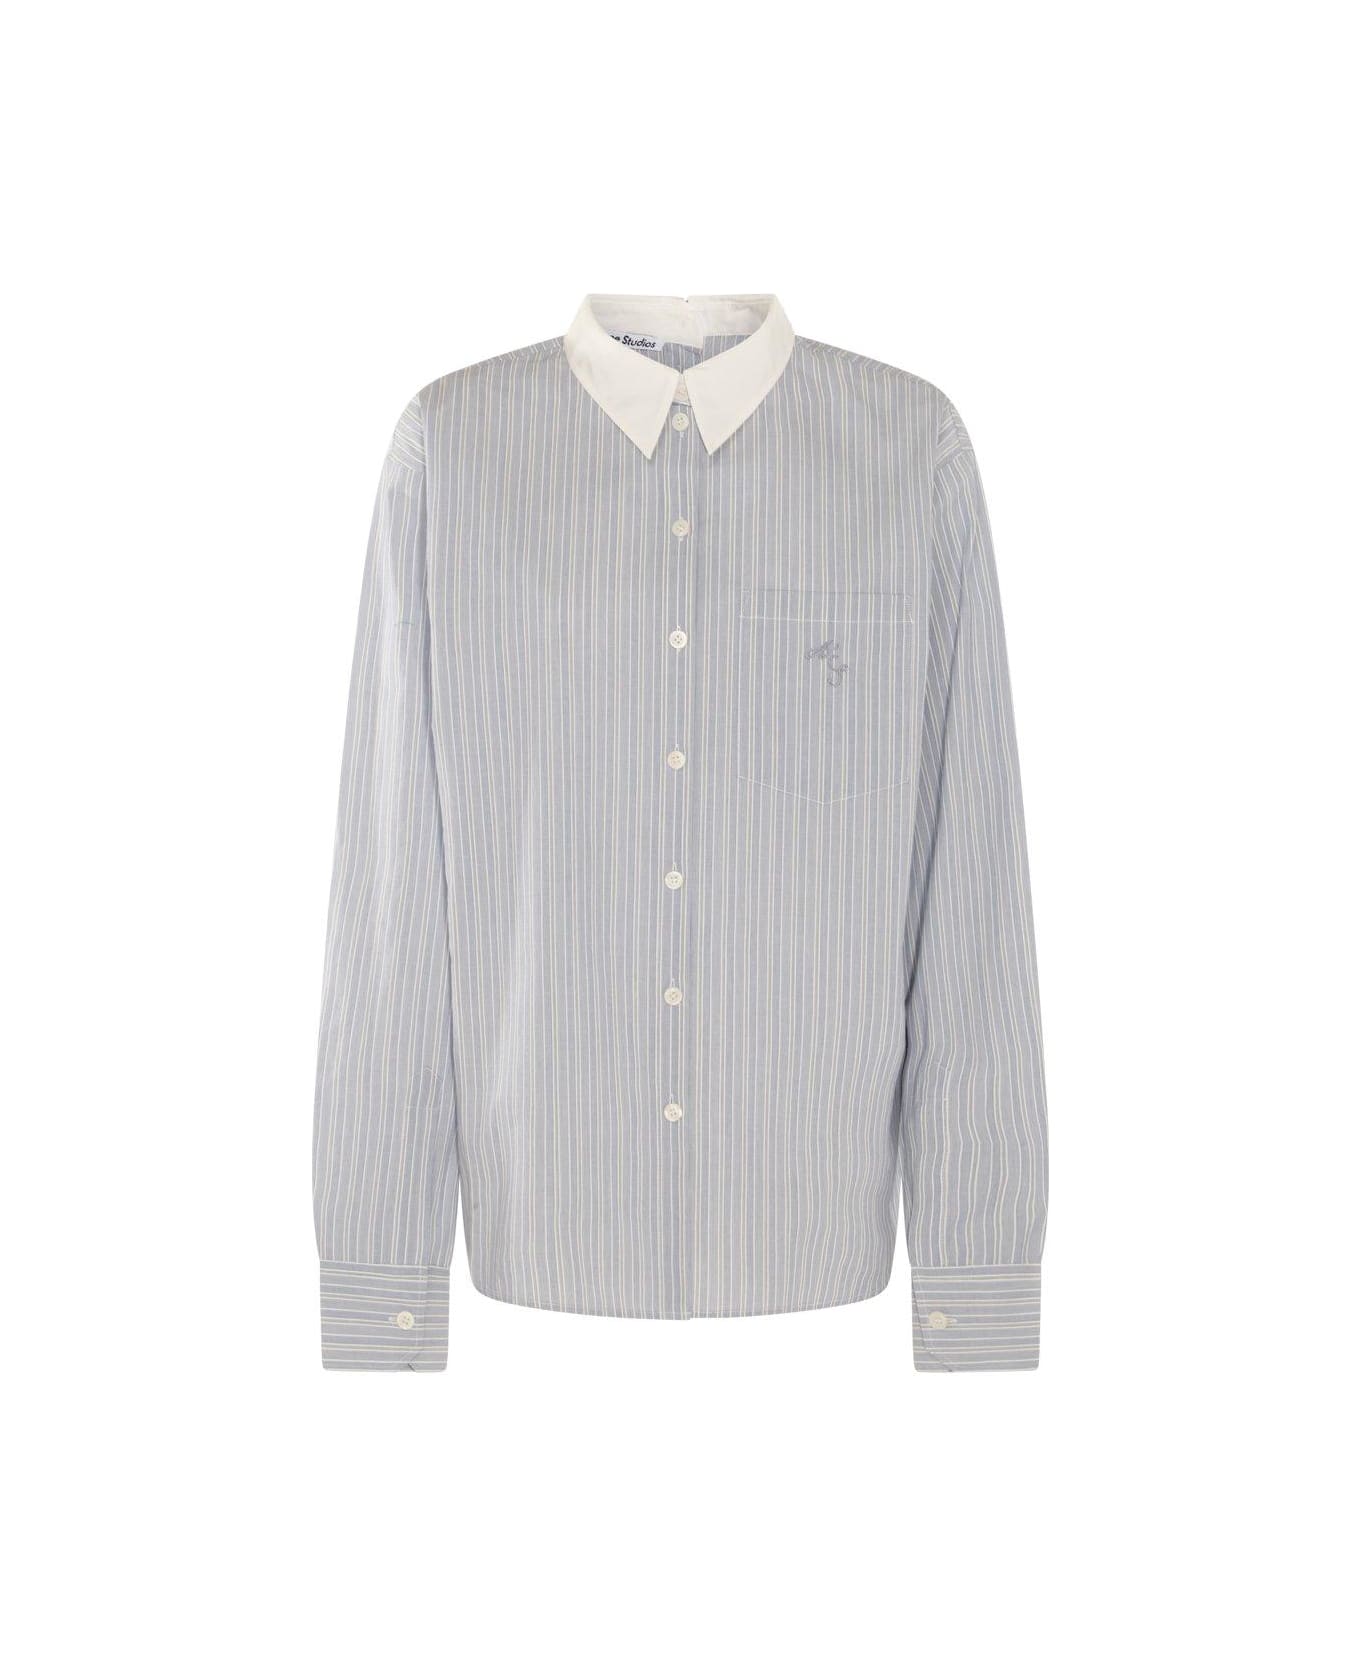 Acne Studios Stripe Detailed Buttoned Shirt - Clear Blue シャツ